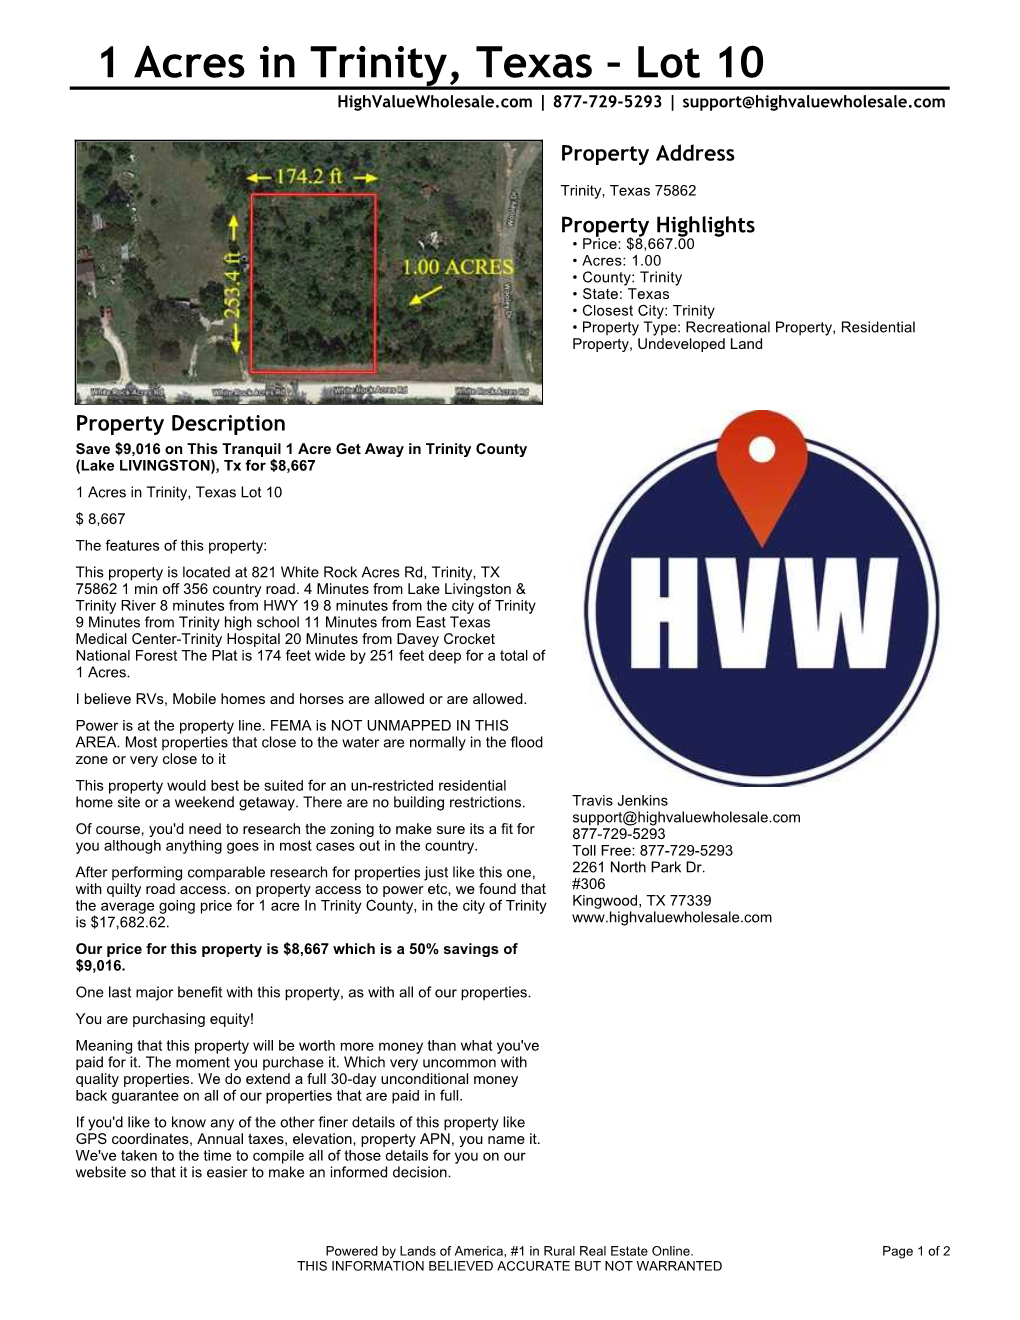 1 Acres in Trinity, Texas – Lot 10 Highvaluewholesale.Com | 877-729-5293 | Support@Highvaluewholesale.Com